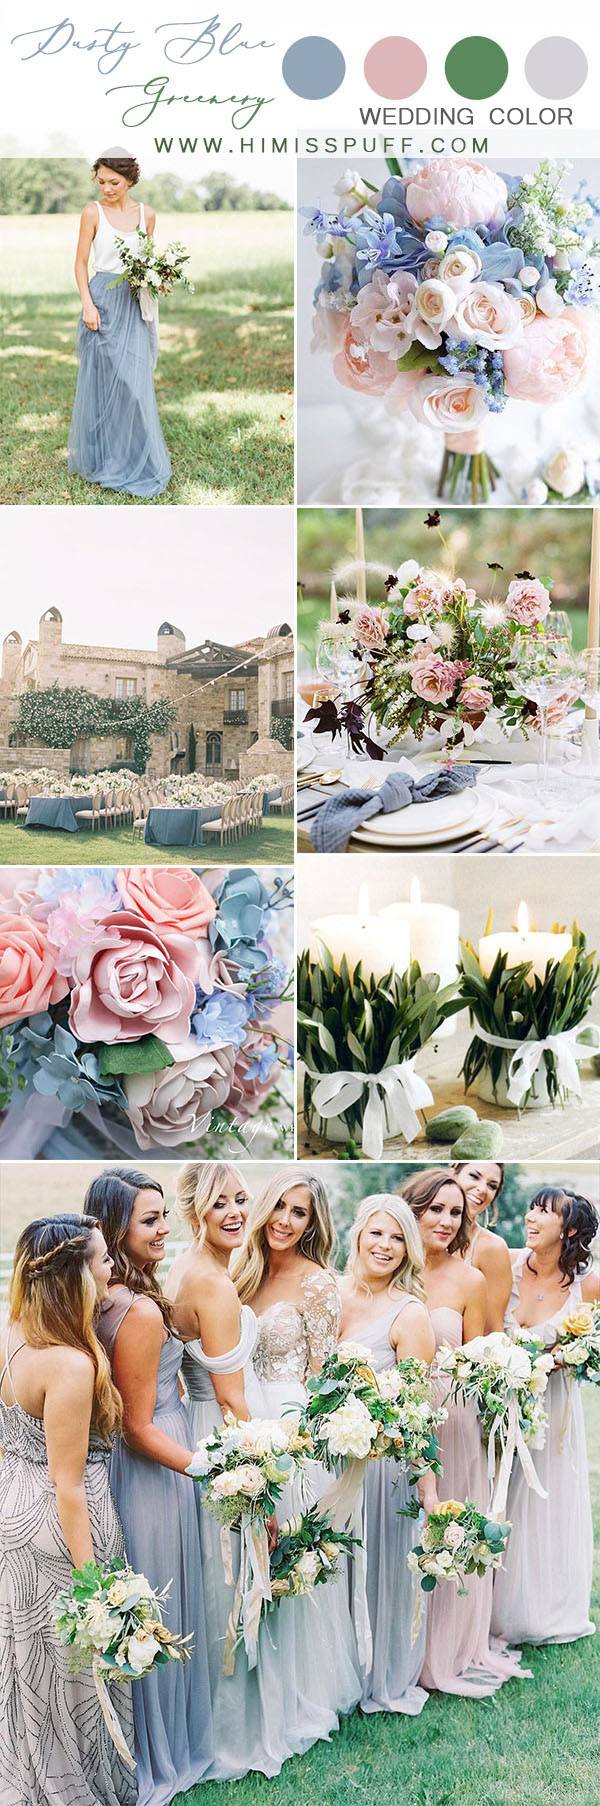 Spring Wedding Colors 2020
 Top 10 Wedding Color Scheme Ideas for 2020 – Hi Miss Puff